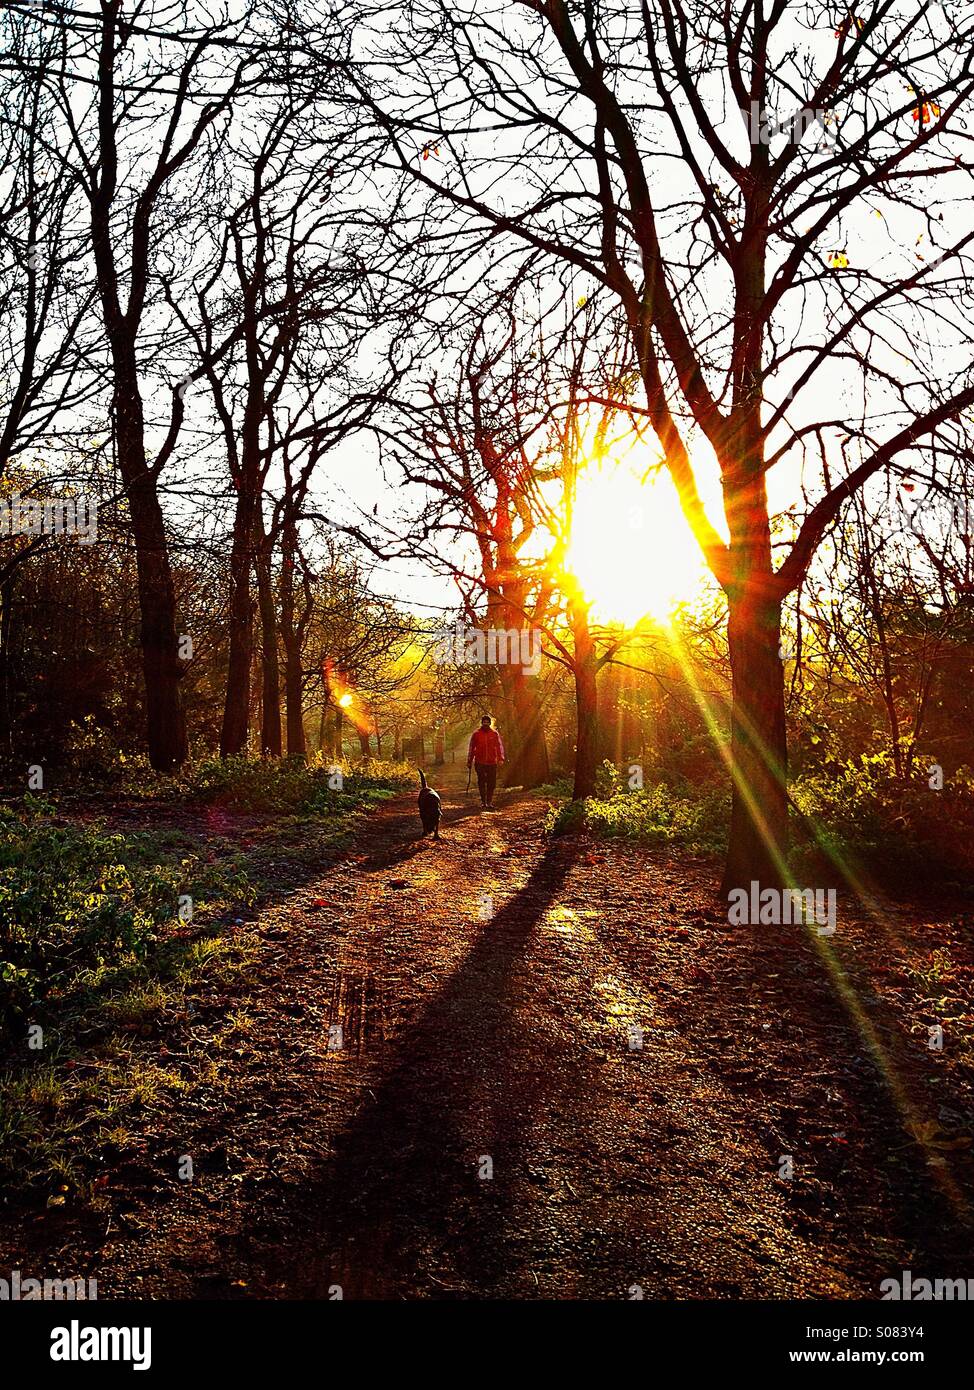 Man and dog walking along tree lined path with sun shining through trees Stock Photo